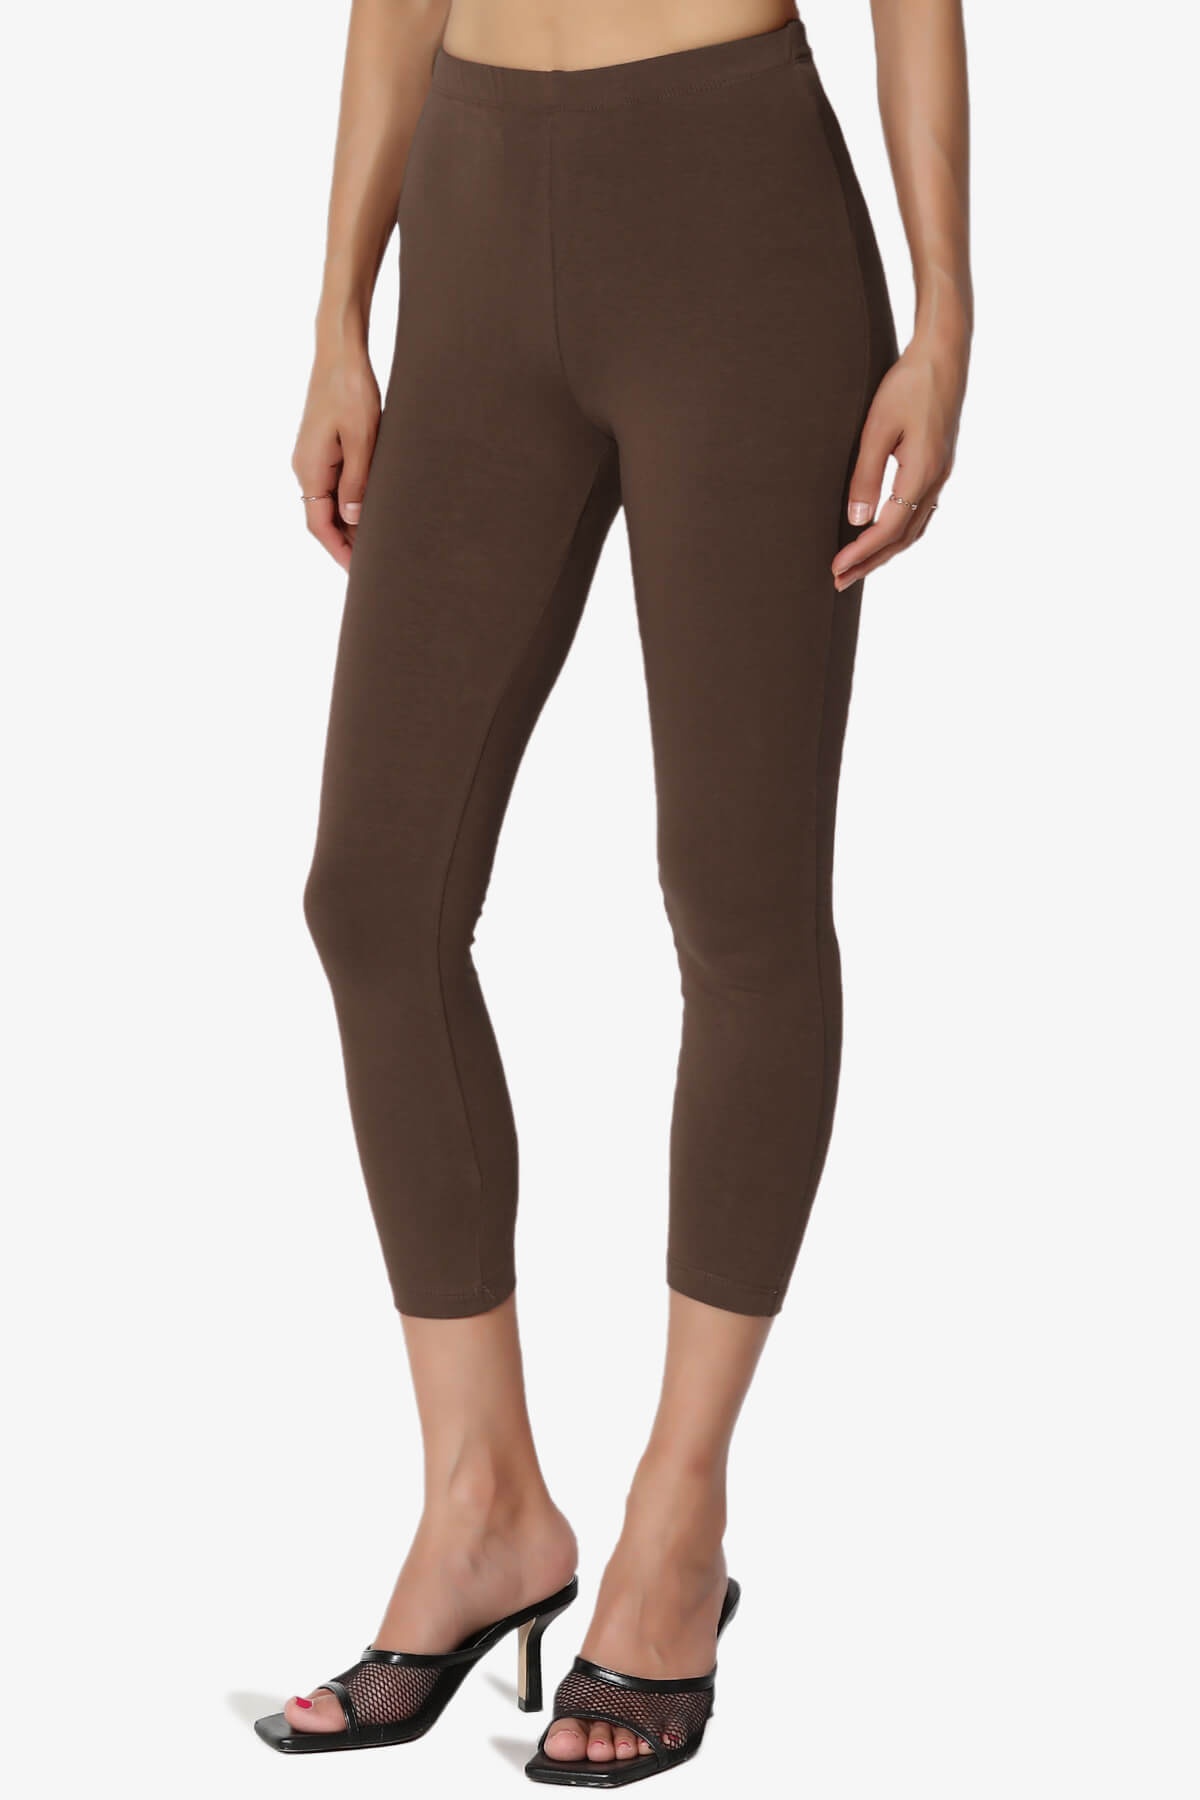 Load image into Gallery viewer, Ansley Luxe Cotton Capri Leggings BROWN_3
